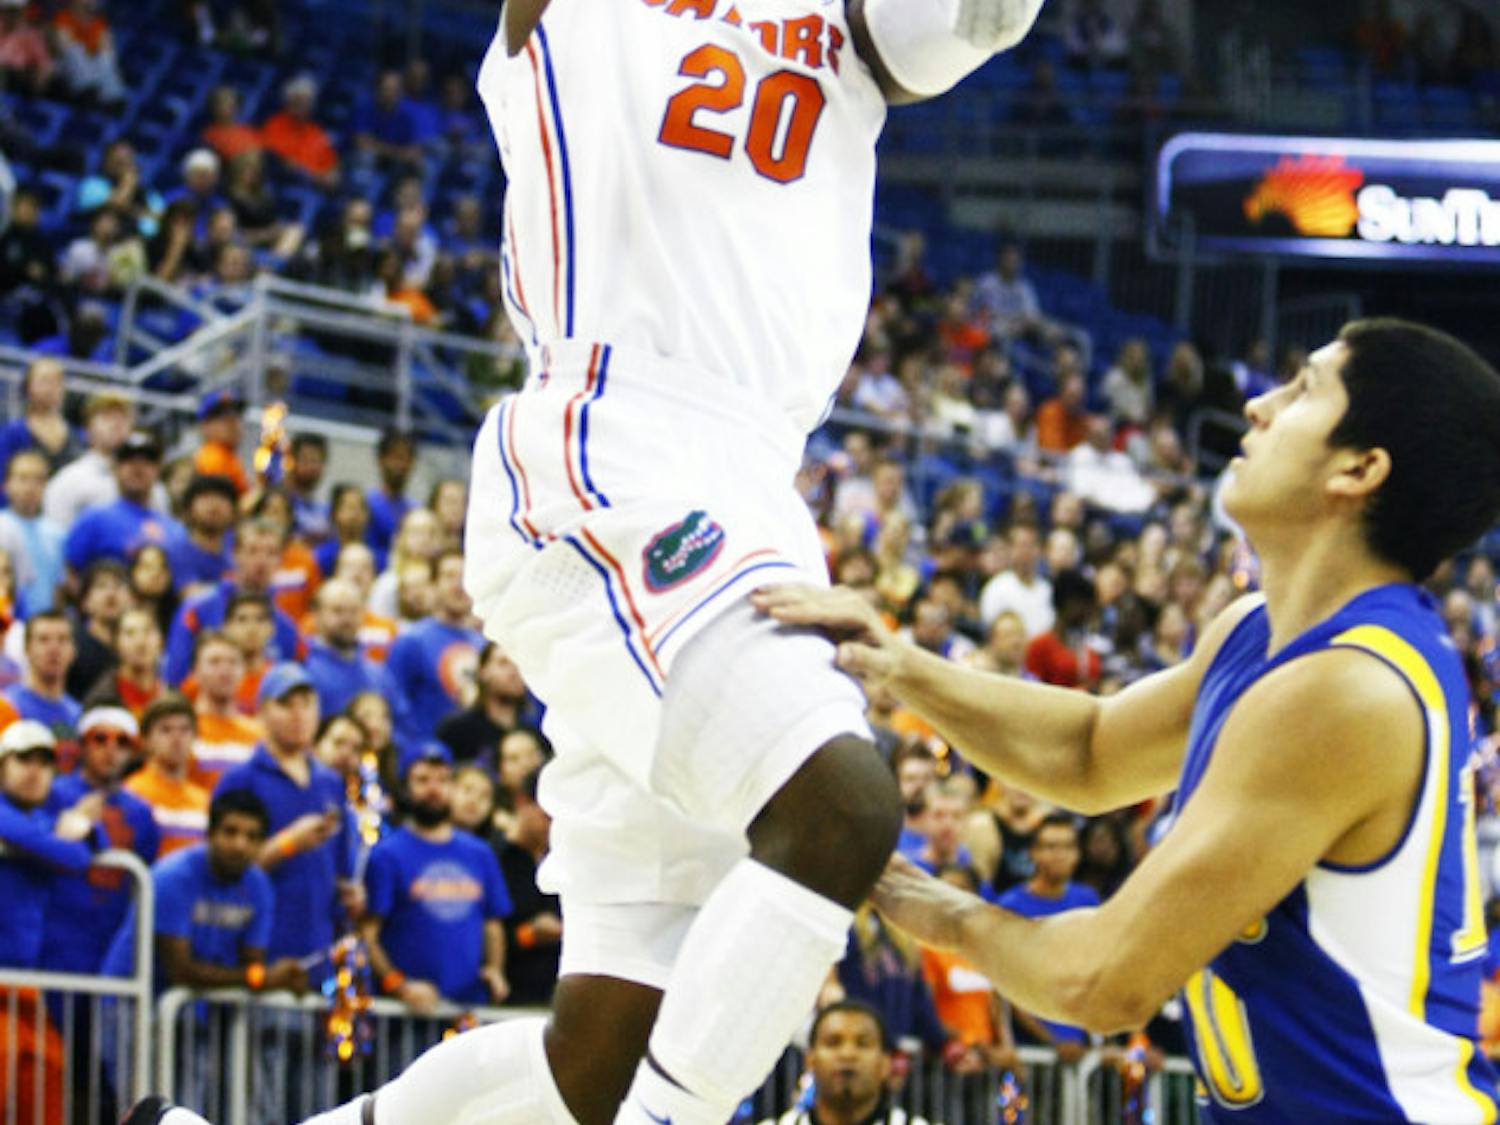 Freshman guard Michael Frazier II attempts a layup during UF’s 101-71 win against Nebraska-Kearney on Nov. 1 in the O’Connell Center. Frazier scored a team-high 17 points against Marquette on Thursday night.
